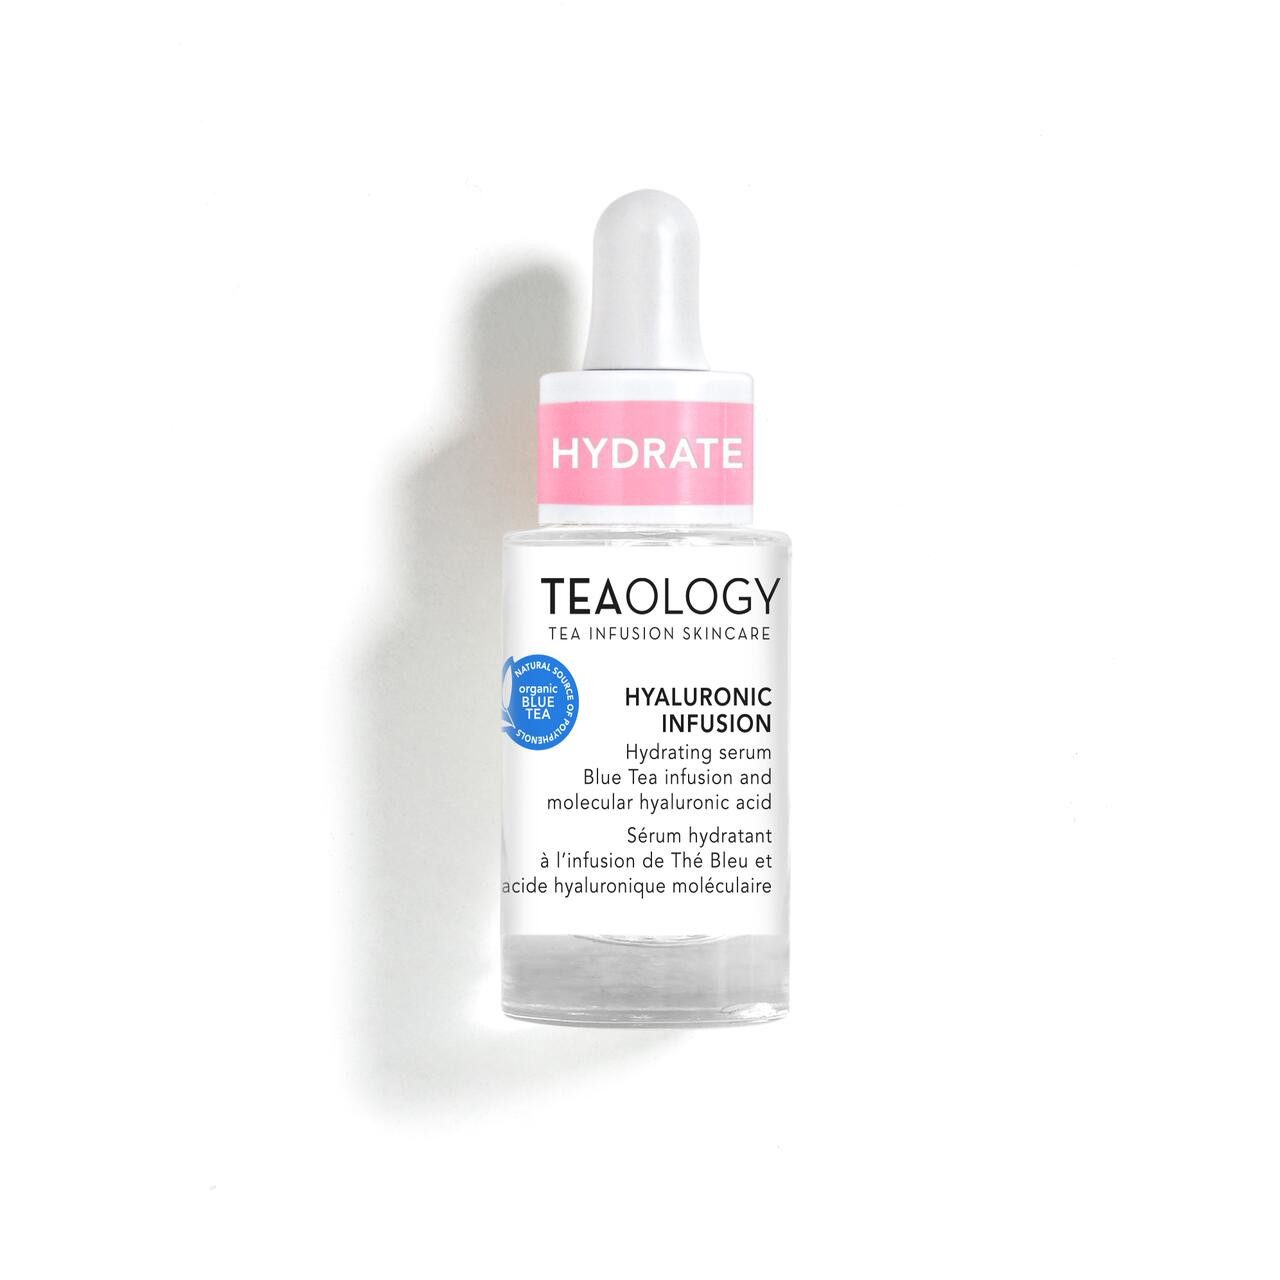 Teaology Gesichtsserum Hyaluronic Infusion